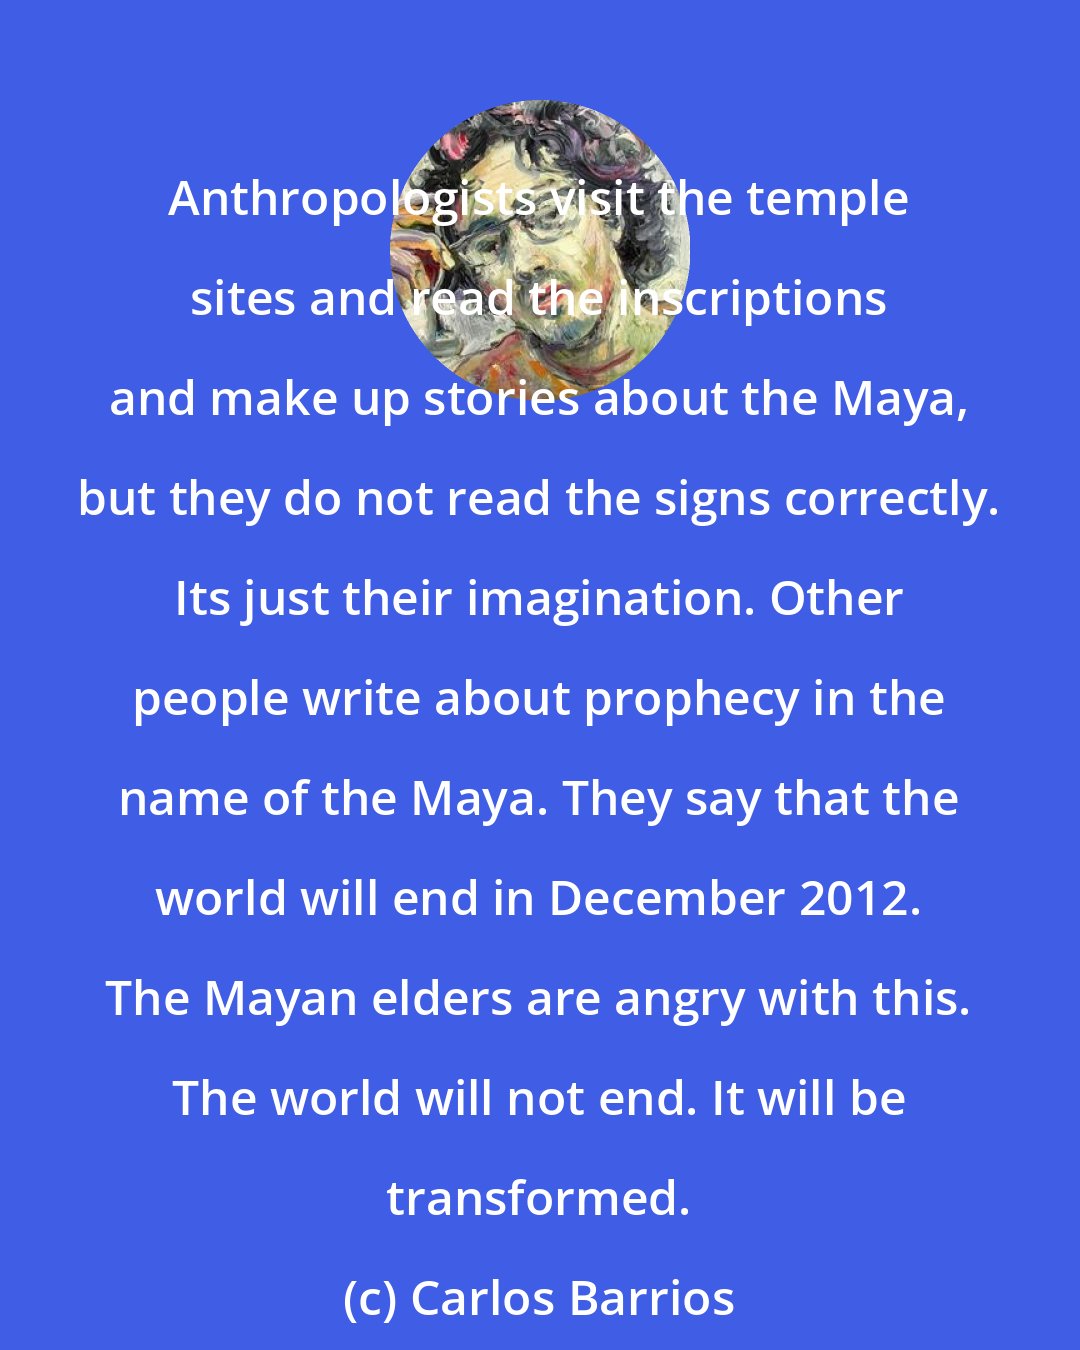 Carlos Barrios: Anthropologists visit the temple sites and read the inscriptions and make up stories about the Maya, but they do not read the signs correctly. Its just their imagination. Other people write about prophecy in the name of the Maya. They say that the world will end in December 2012. The Mayan elders are angry with this. The world will not end. It will be transformed.